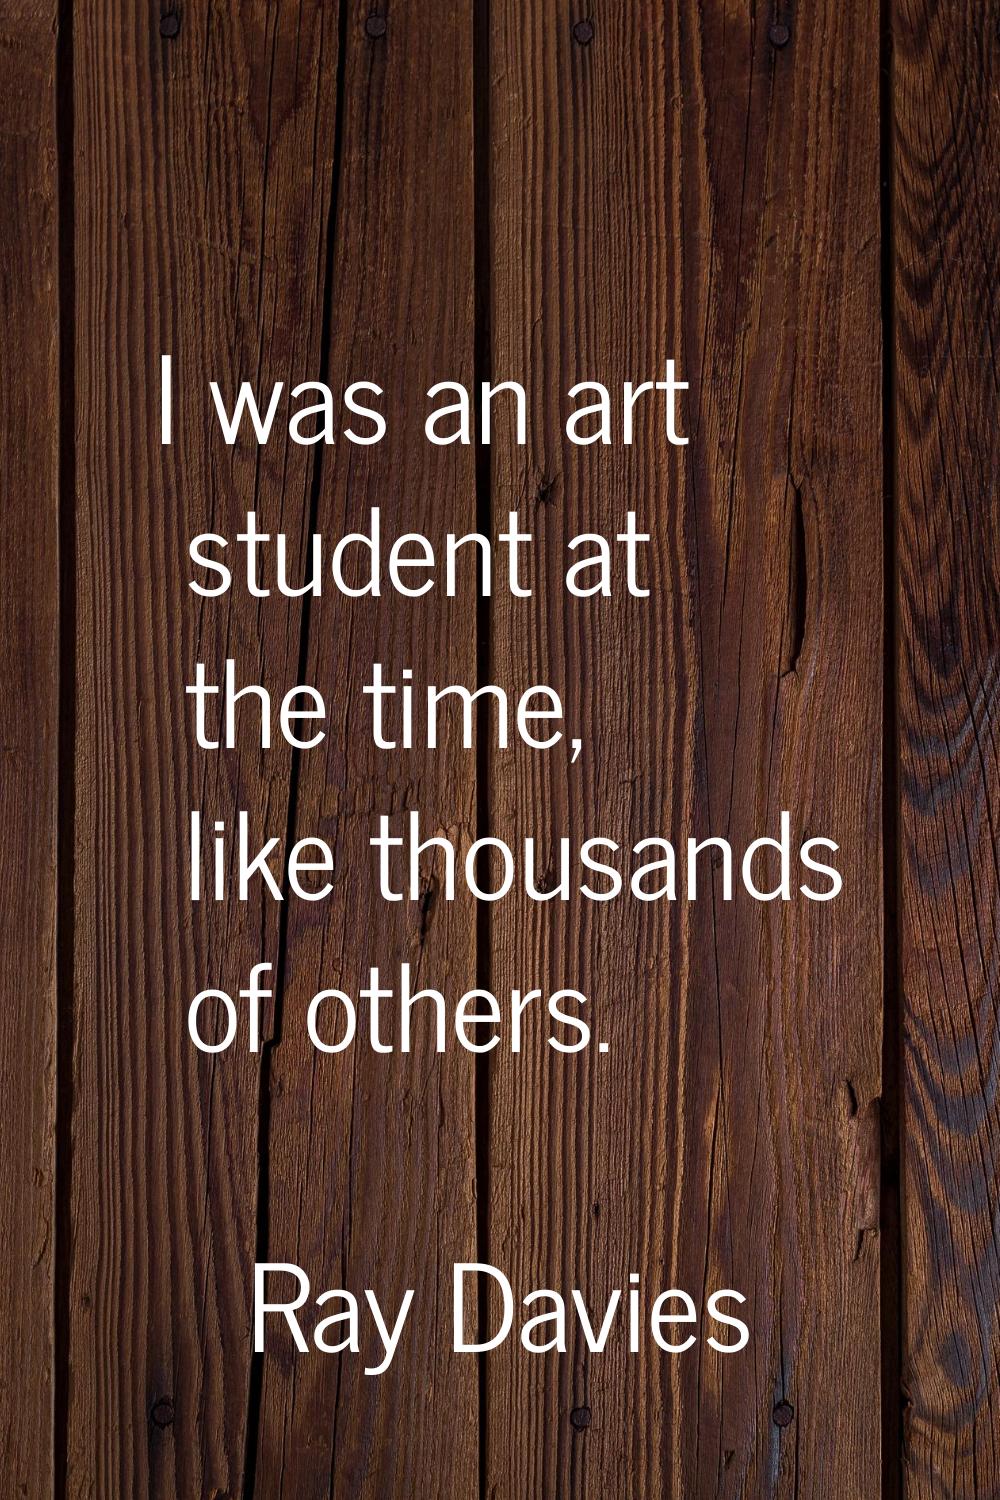 I was an art student at the time, like thousands of others.